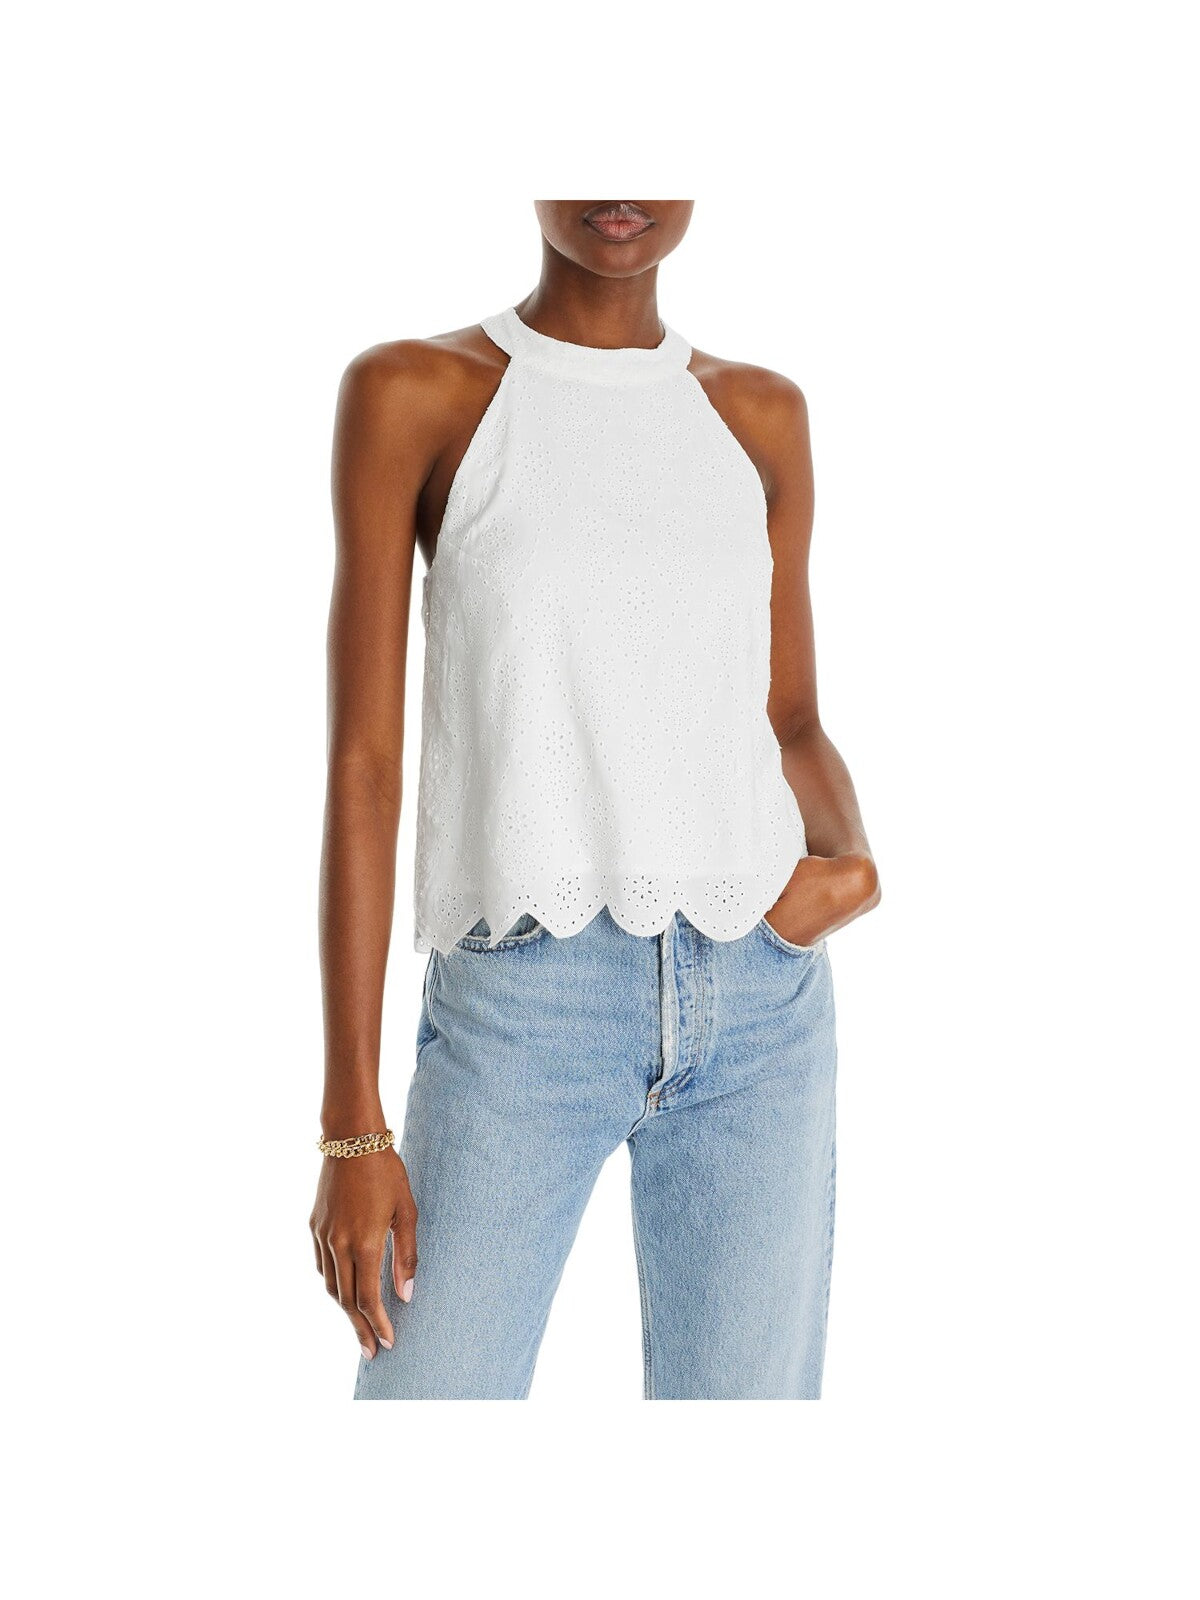 AQUA Womens White Scalloped Lined Cut-in Shoulders Keyhole Back Sleeveless Crew Neck Top XS